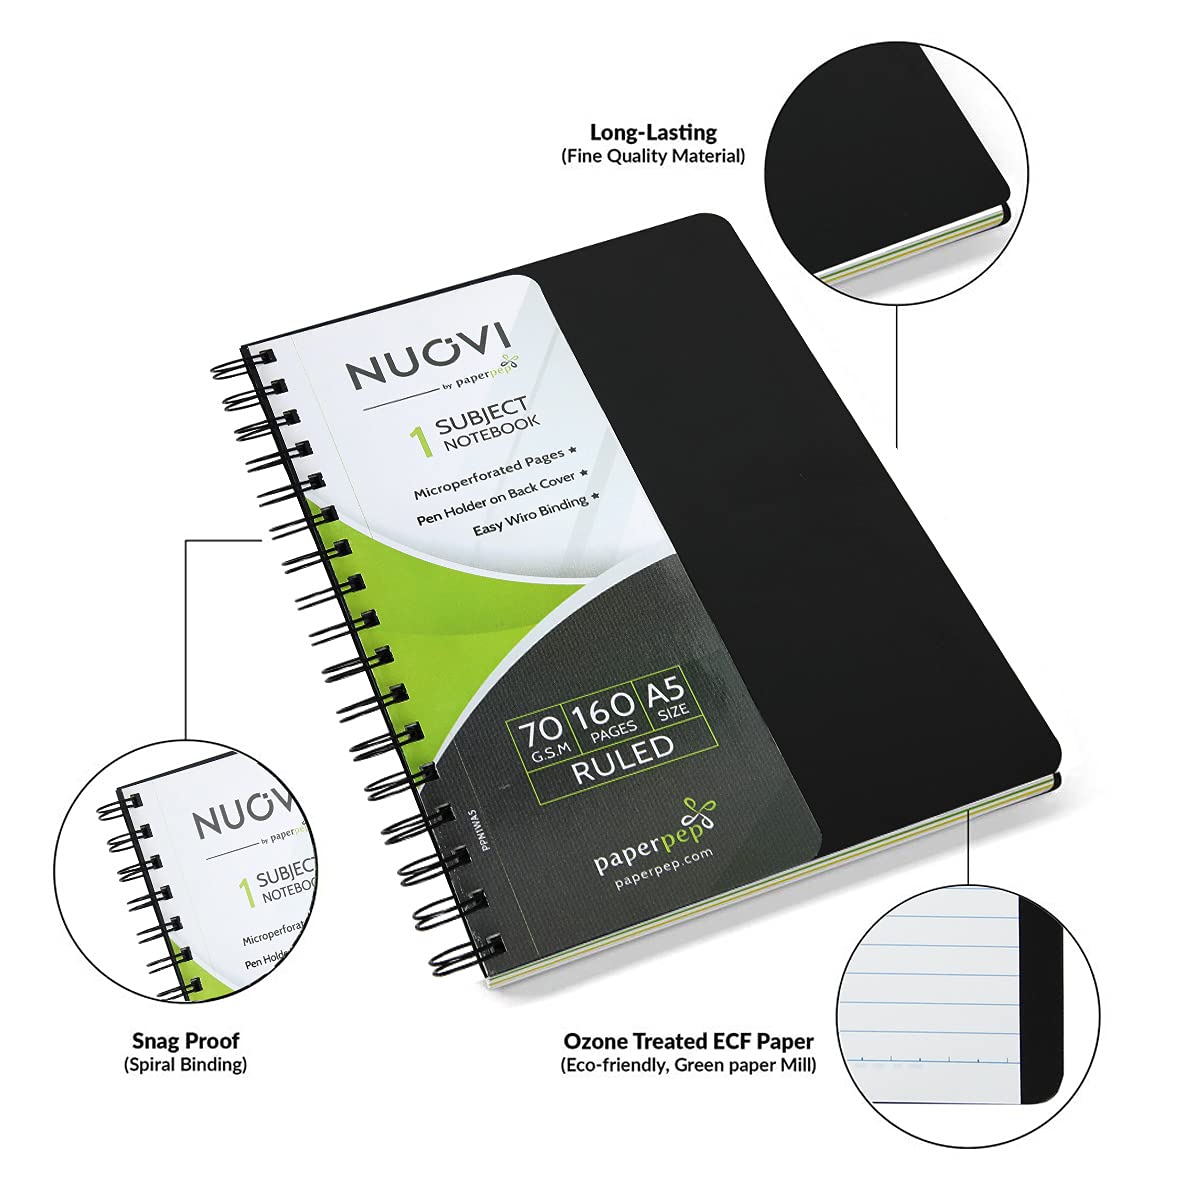 Paper Pep Nouvi 1 Subject Single Ruled 70GSM 160 Pages B5 Notebook (Pack of 2)